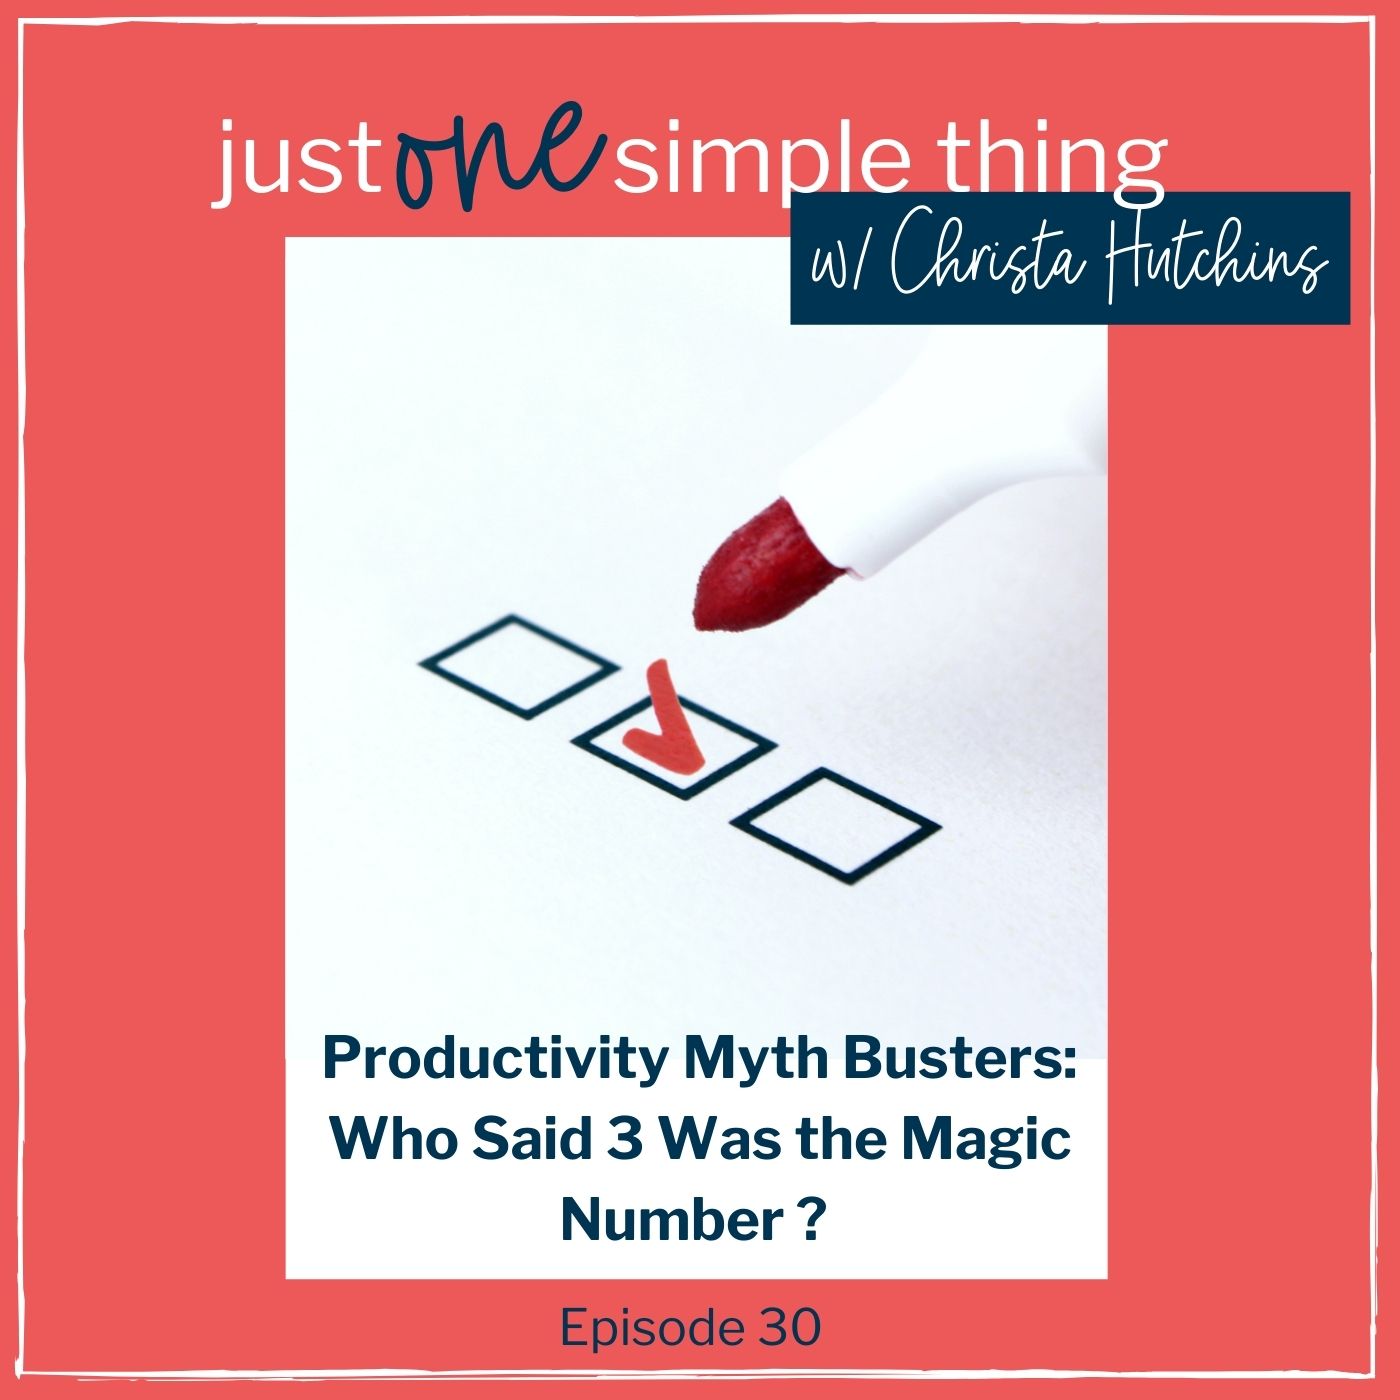 Productivity Myth Busters: Who Said 3 Was the Magic Number?